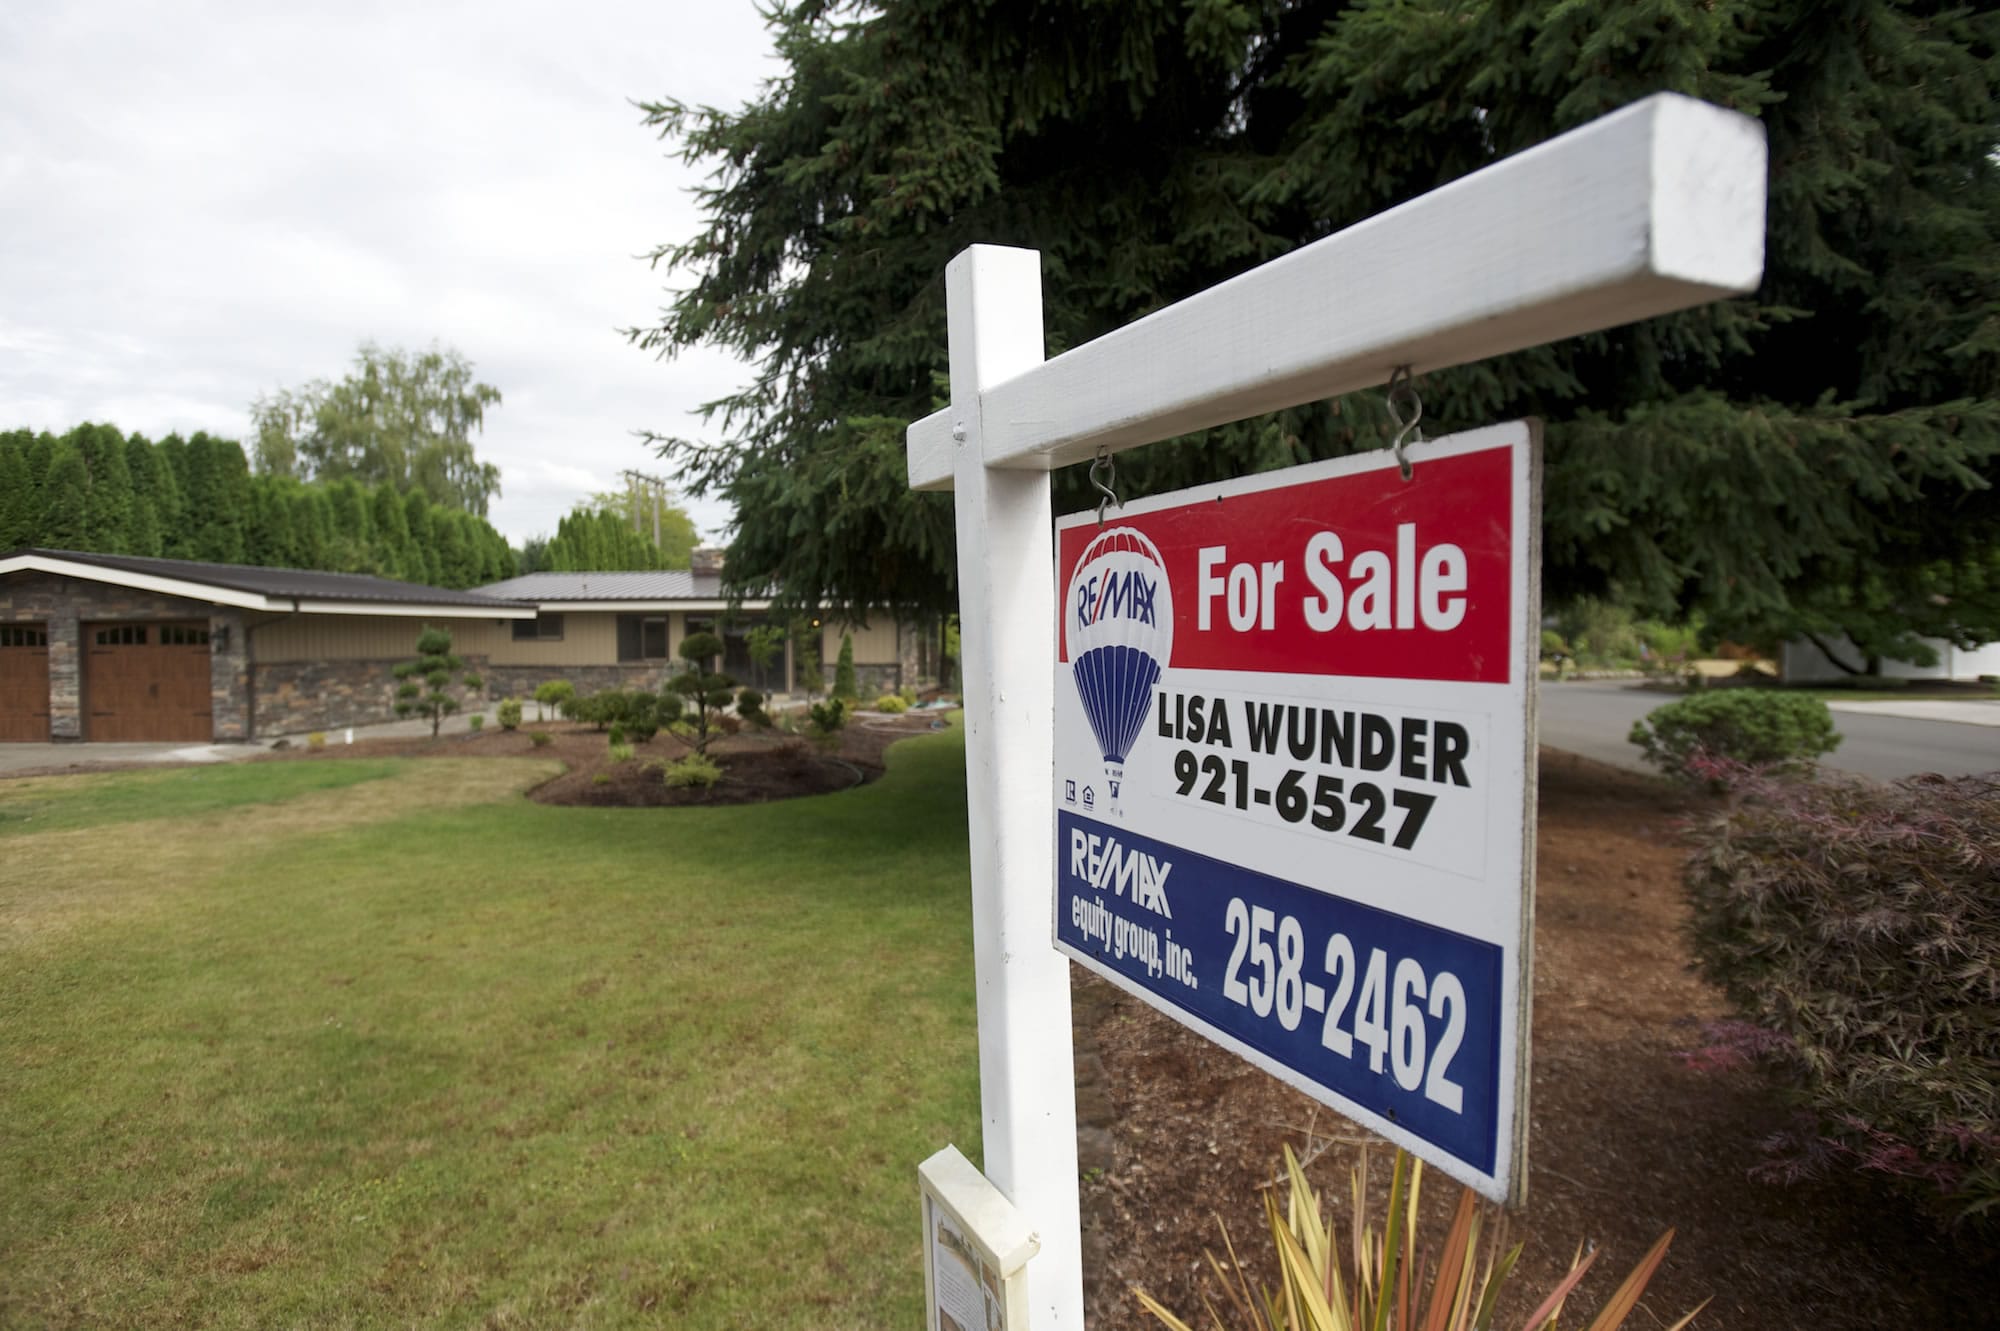 Clark County home sales continued to show signs of improvement in March, as residential values increased and more sellers listed their properties for sale.